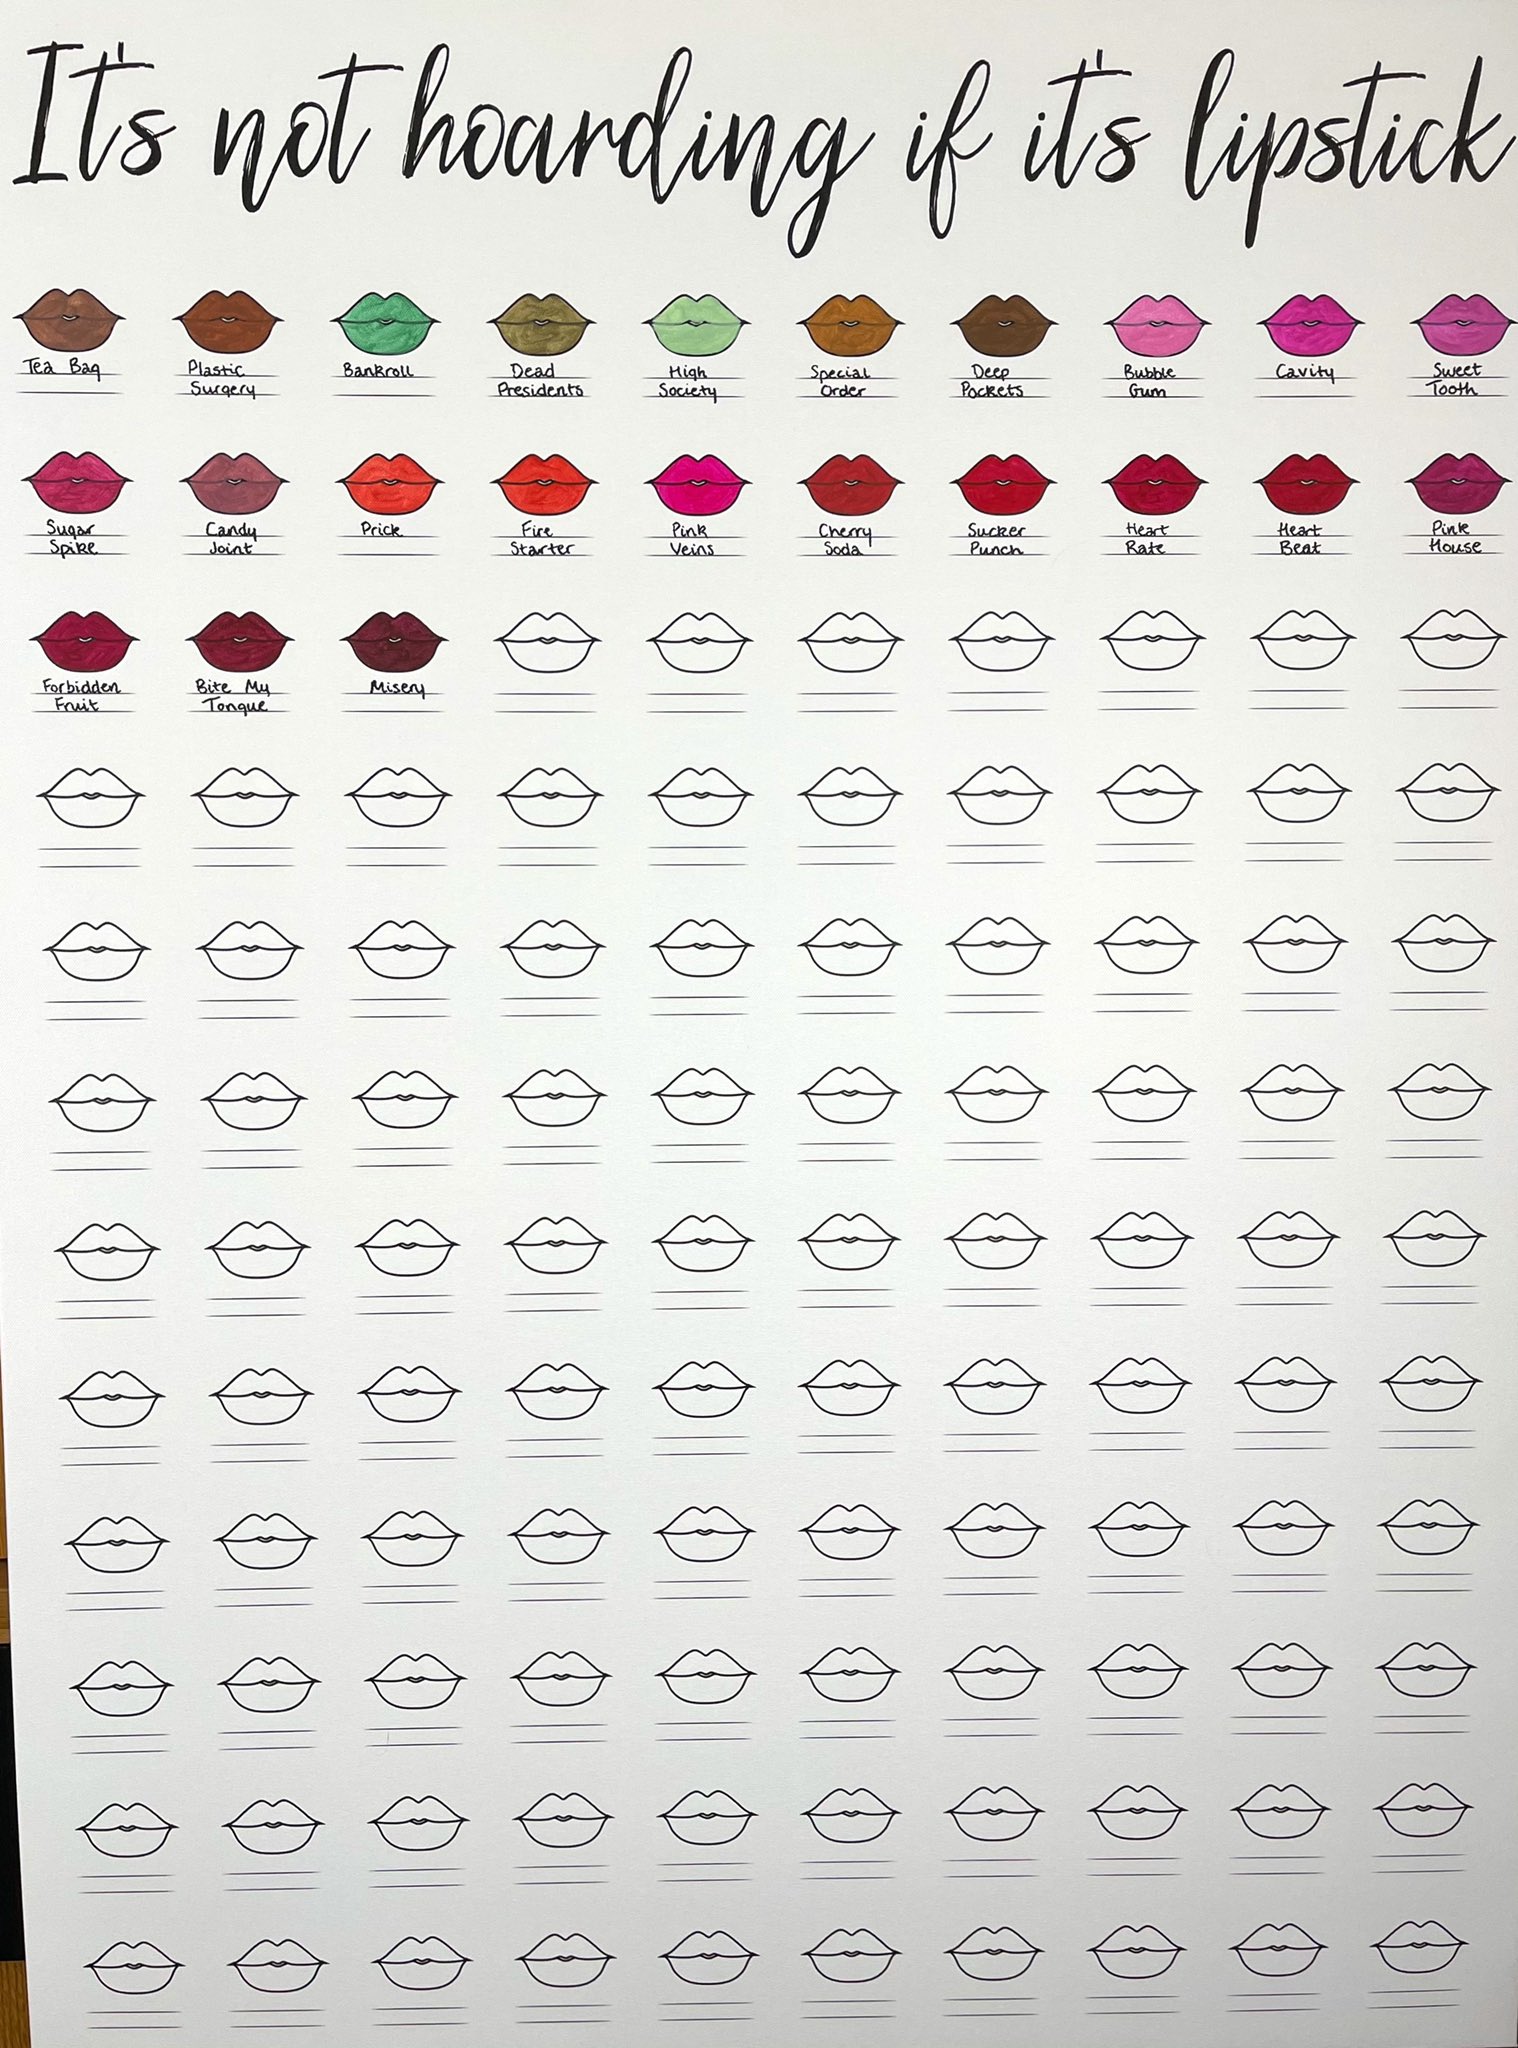 XL Size with 120 Swatch Spots - The Swatch Chart in It's Not Hoarding –  glowgurl